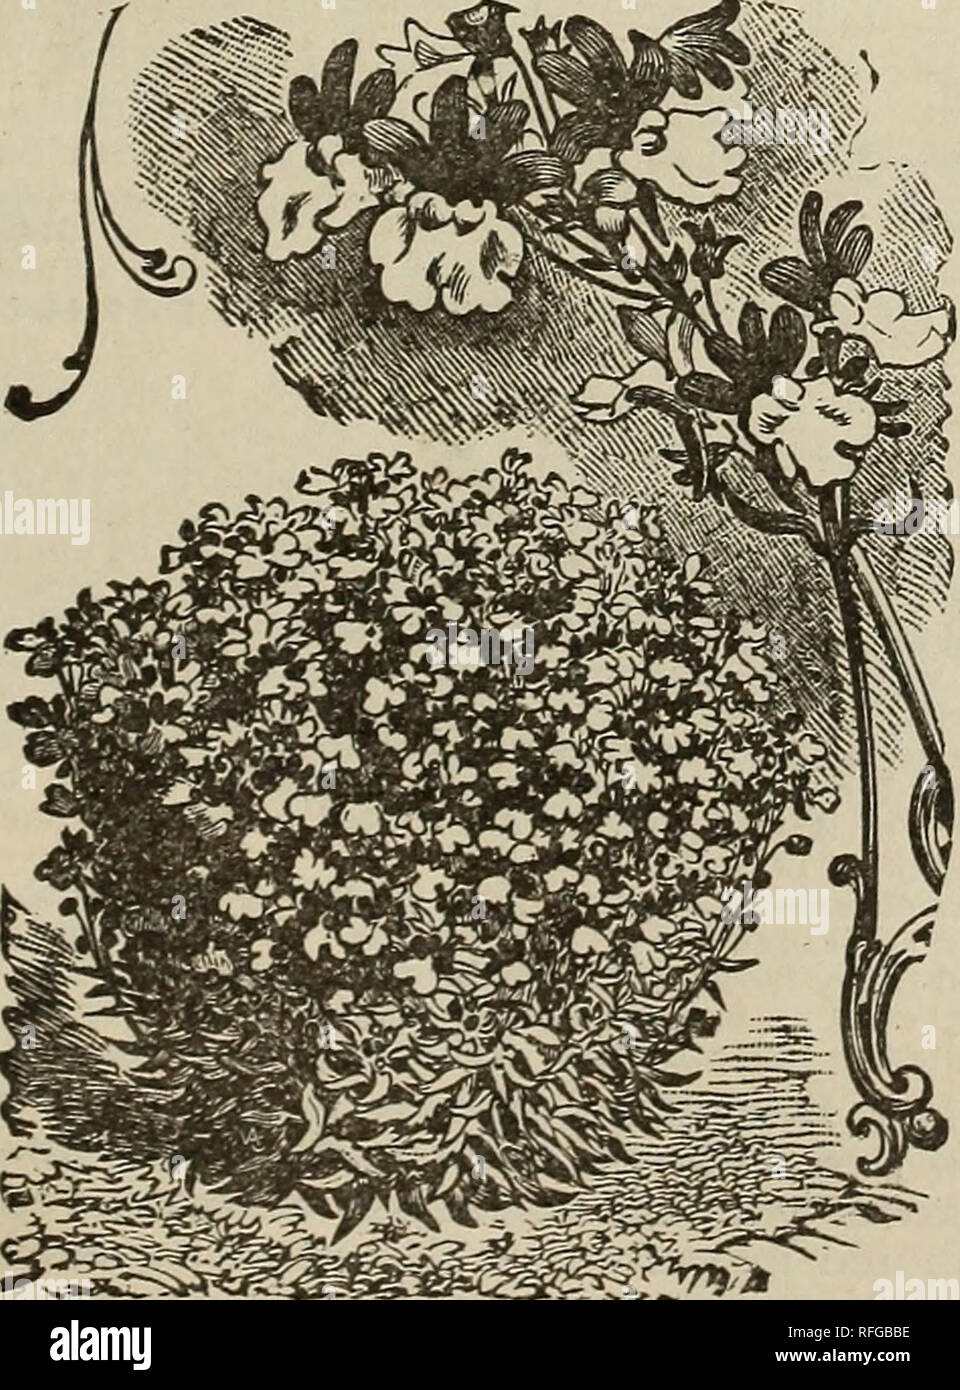 . Park's floral guide 1901. Nursery stock Pennsylvania Catalogs; Flowers Seeds Catalogs; Bulbs (Plants) Catalogs. Medicago, annuals; snails, spirals, etc.. mixed Mesetnbryantliemuin, fine for rock-work; foli- age and flowers both pretty; separate or mixed... iEf/mo«rt pudica,Sensitive Plant; acacia-like foliage, Mirabilis, Four-o'clock, beautiful, showy, fragrant flowers; tall sorts, separate or mixed 3 The same with variegated foliage 3 Dwarf sorts mixed. 3 Longiflora, long, sweet flowers... 3 Multiflora, perennial, free-flowering. , 3 Complete mixture of all varieties 3 itfof rccella, Shell- Stock Photo